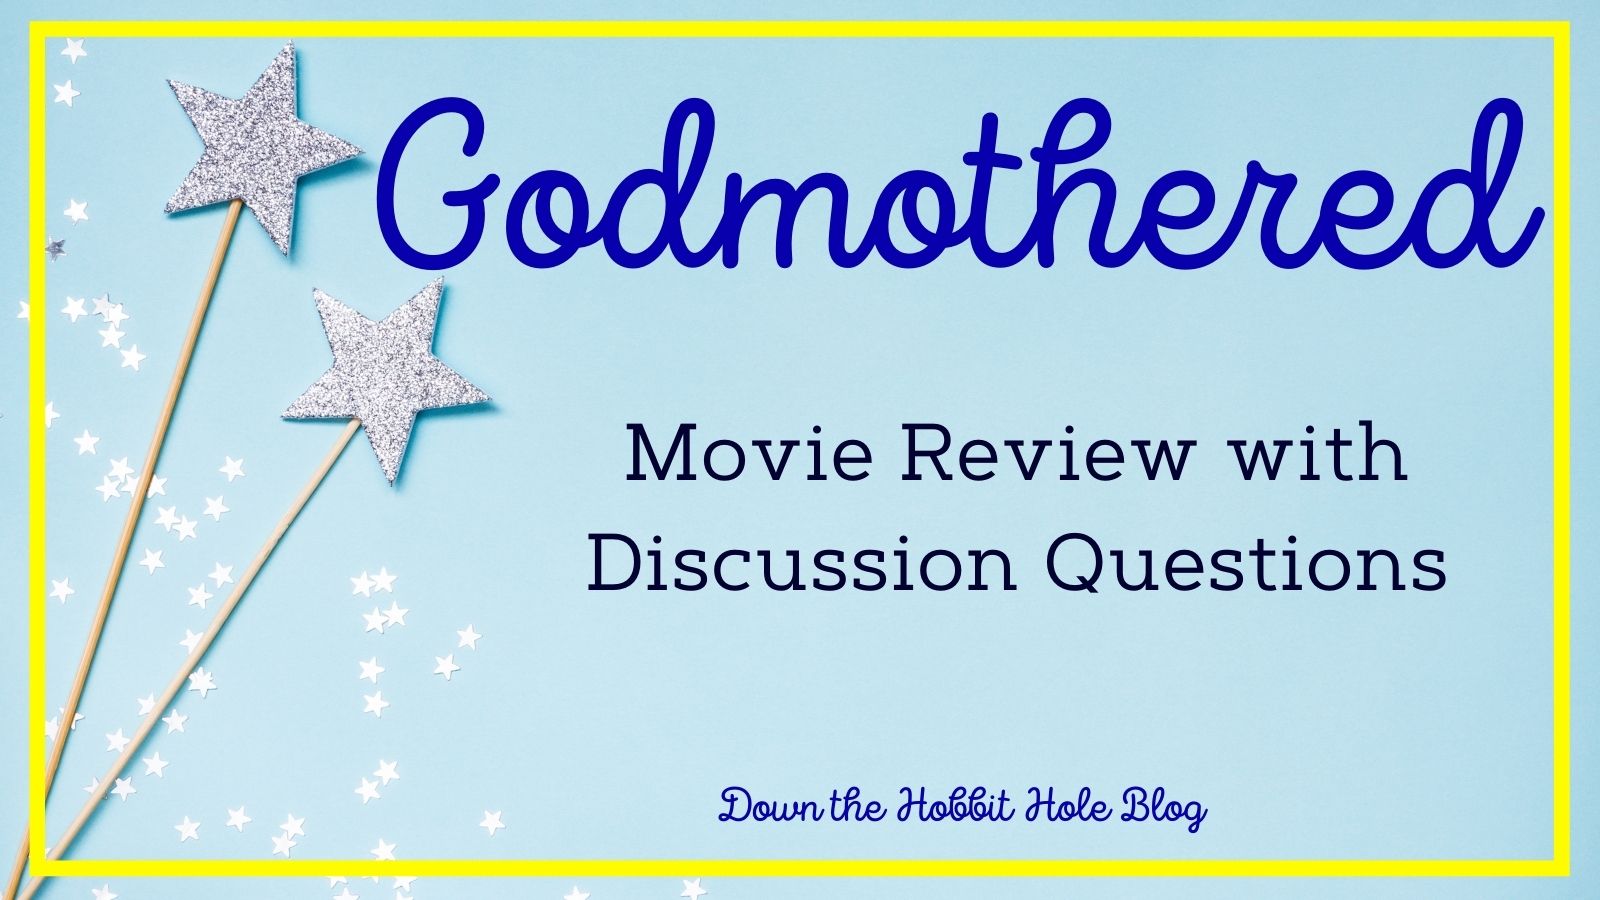 5 Lessons from Godmothered! Plus a Godmothered review with discussion questions!